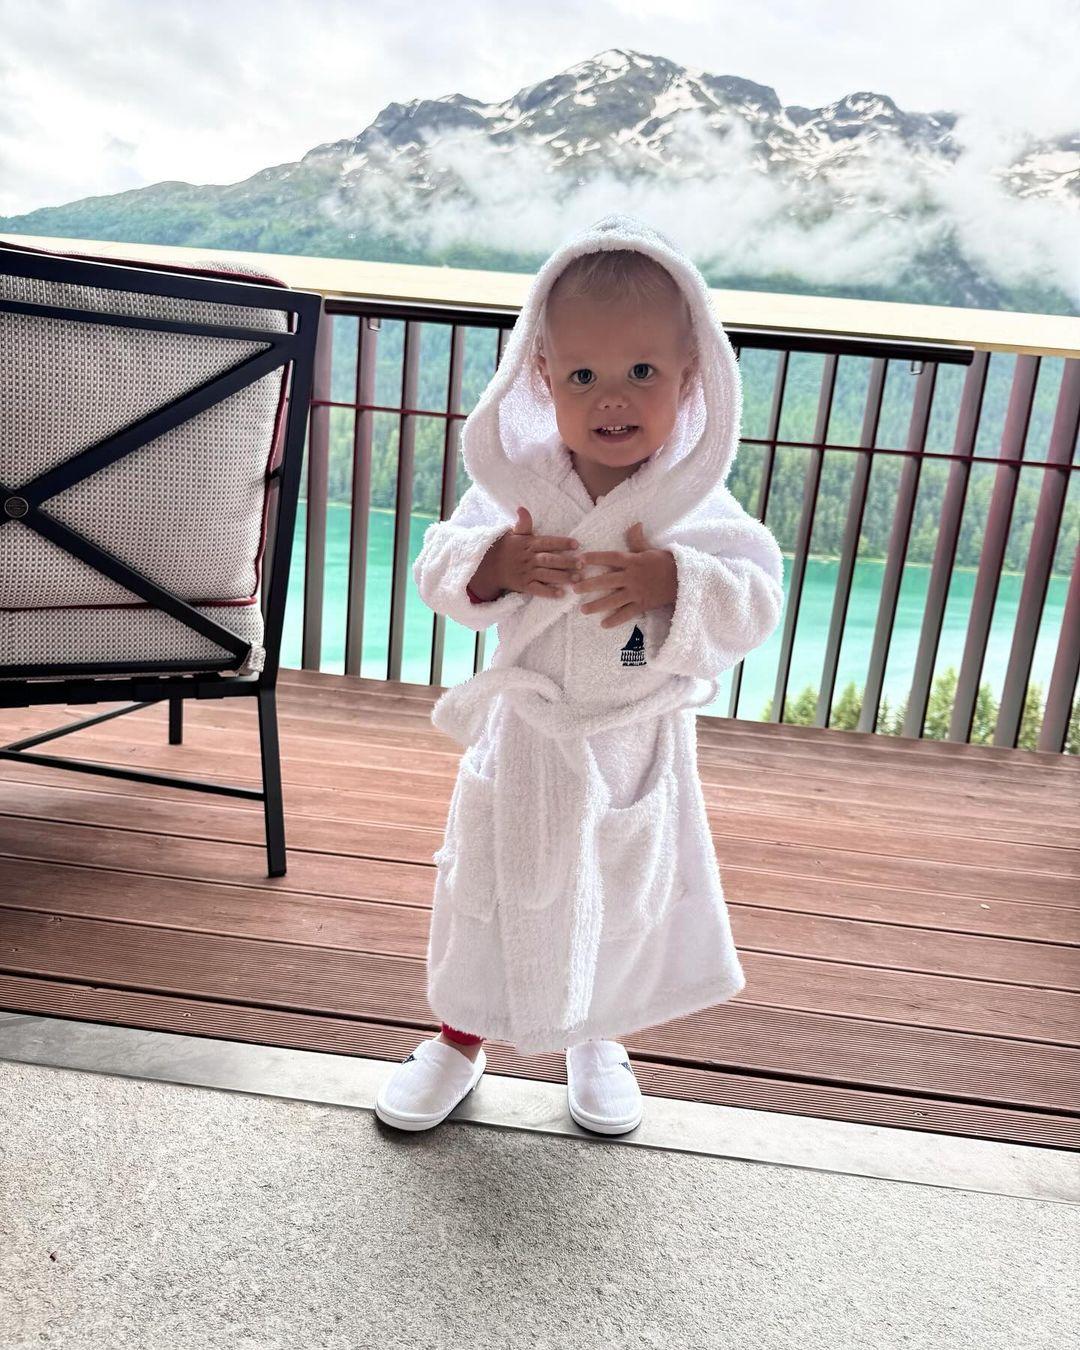 Brittany and Patrick Mahomes's child in a bathrobe